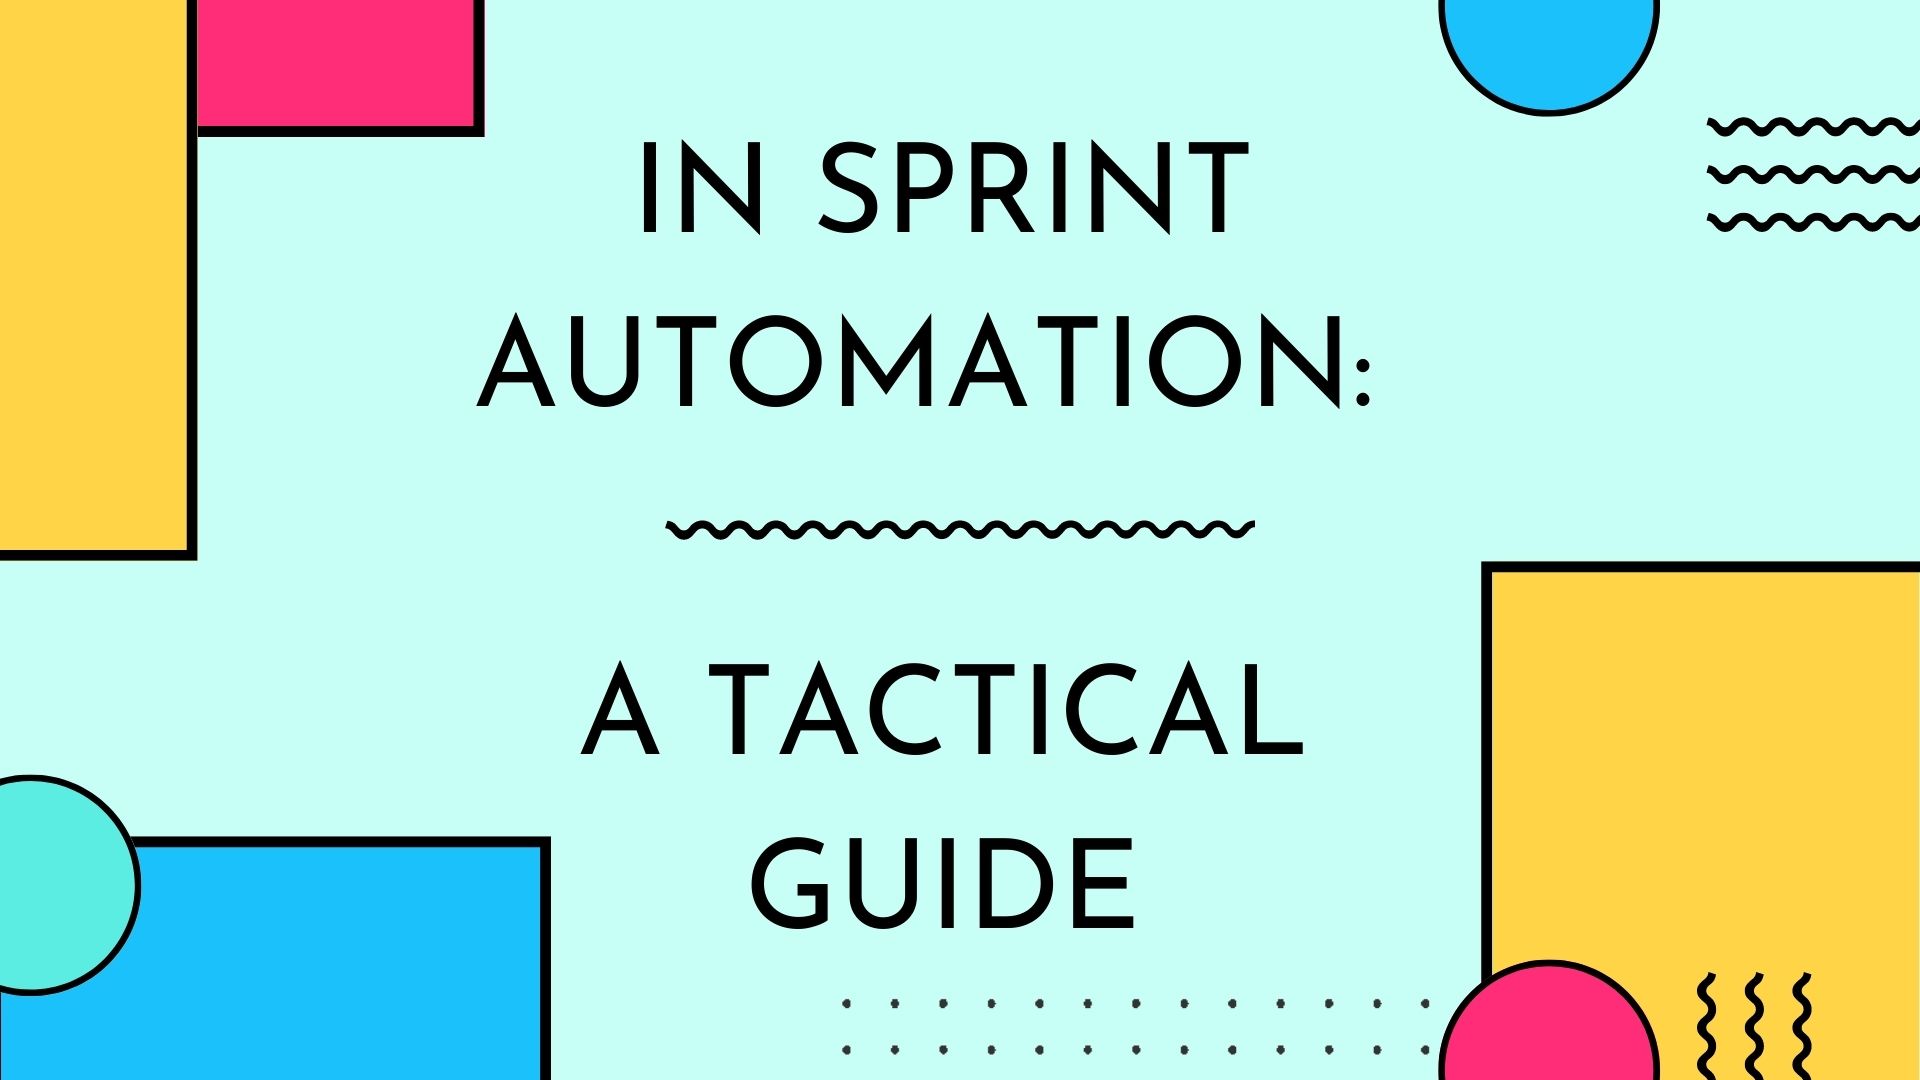 How to begin in sprint automation: A tactical guide